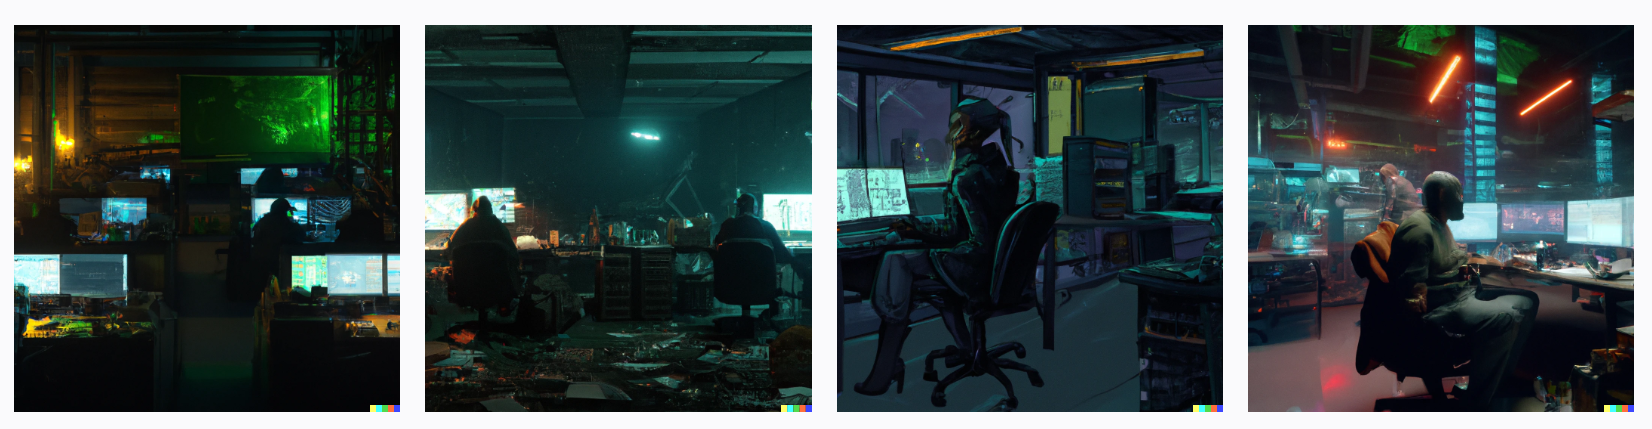 night shift of old programmers work in large open-office post nuclear post apocalyptic cyberpunk, digital art